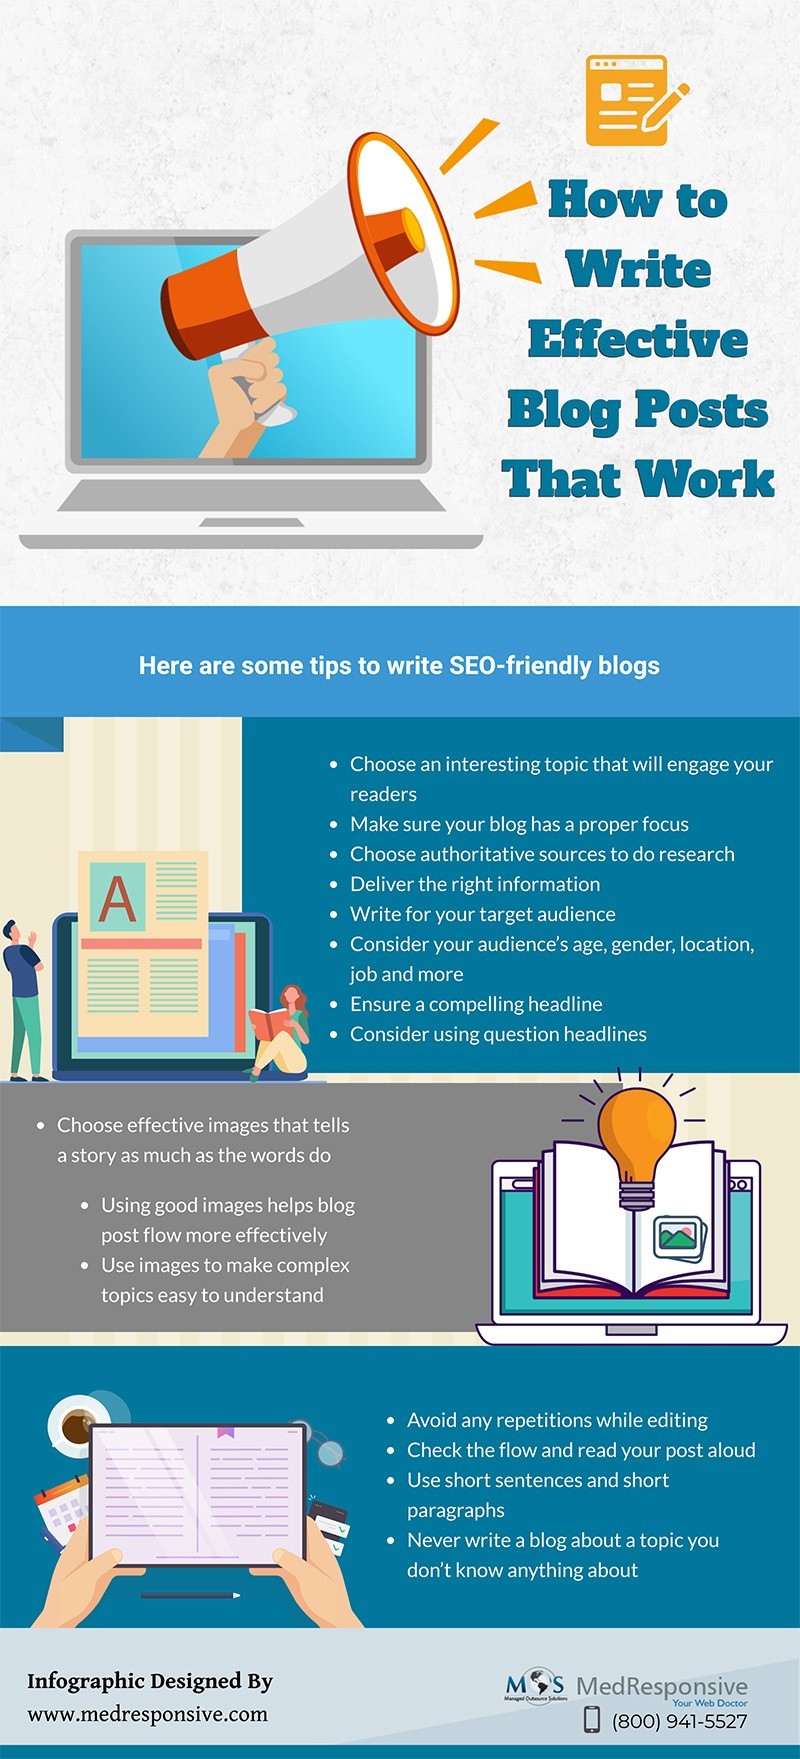 How to Write Effective Blog Posts That Work